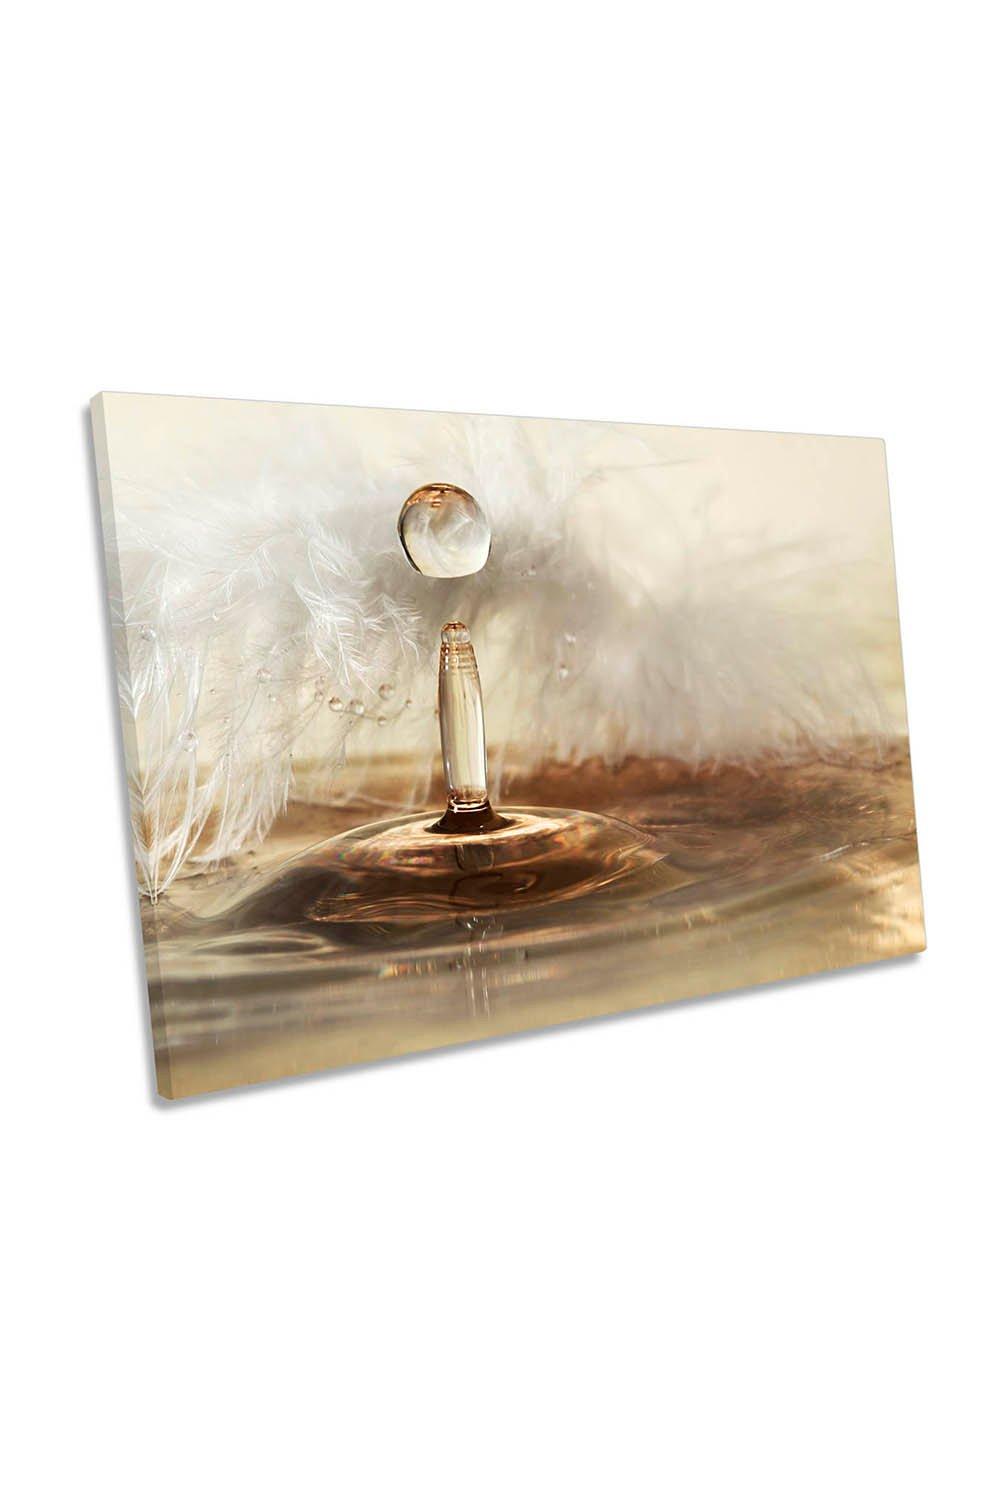 Golden Feather drops Ripple Bathroom Canvas Wall Art Picture Print